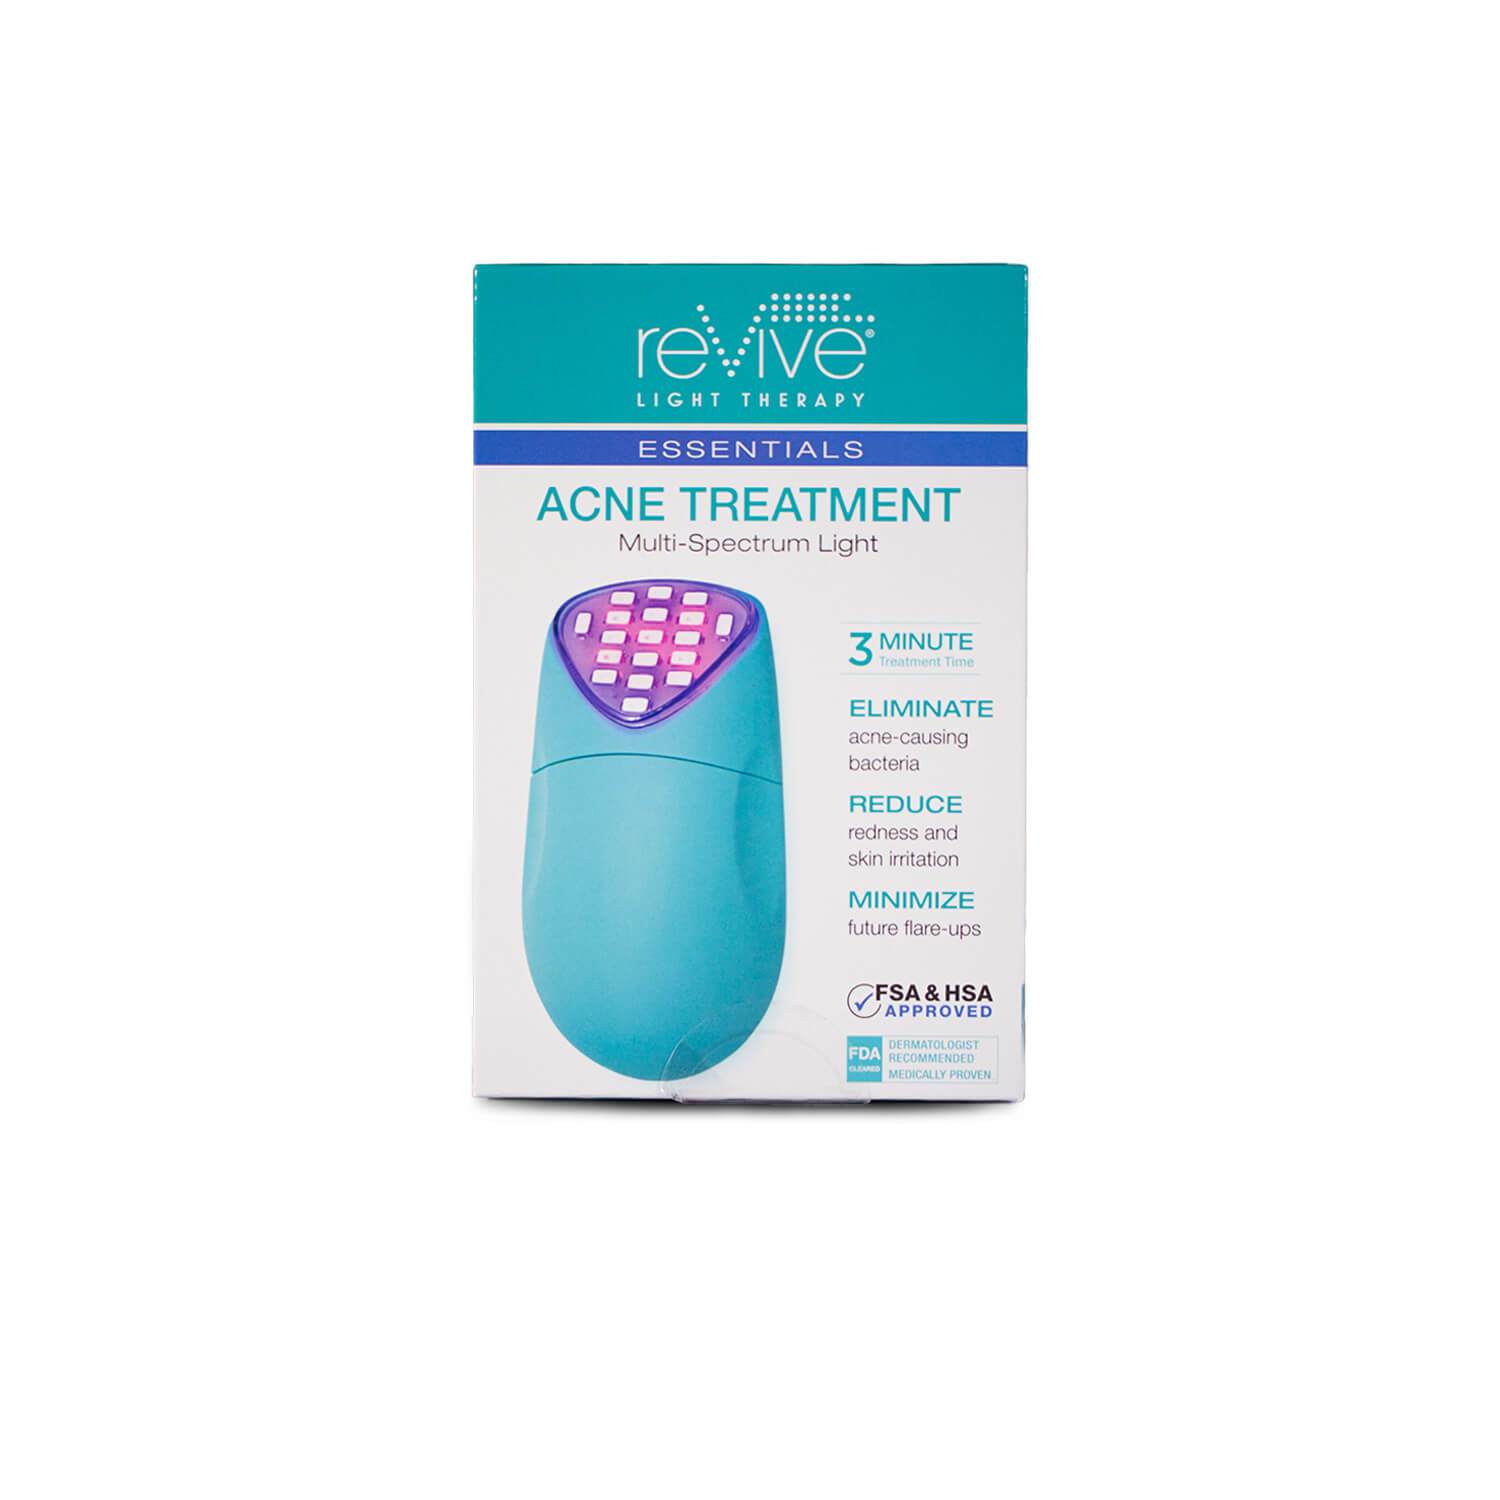 reVive Light Therapy® Essentials— Light Therapy for Acne Treatment - Carex Health Brands